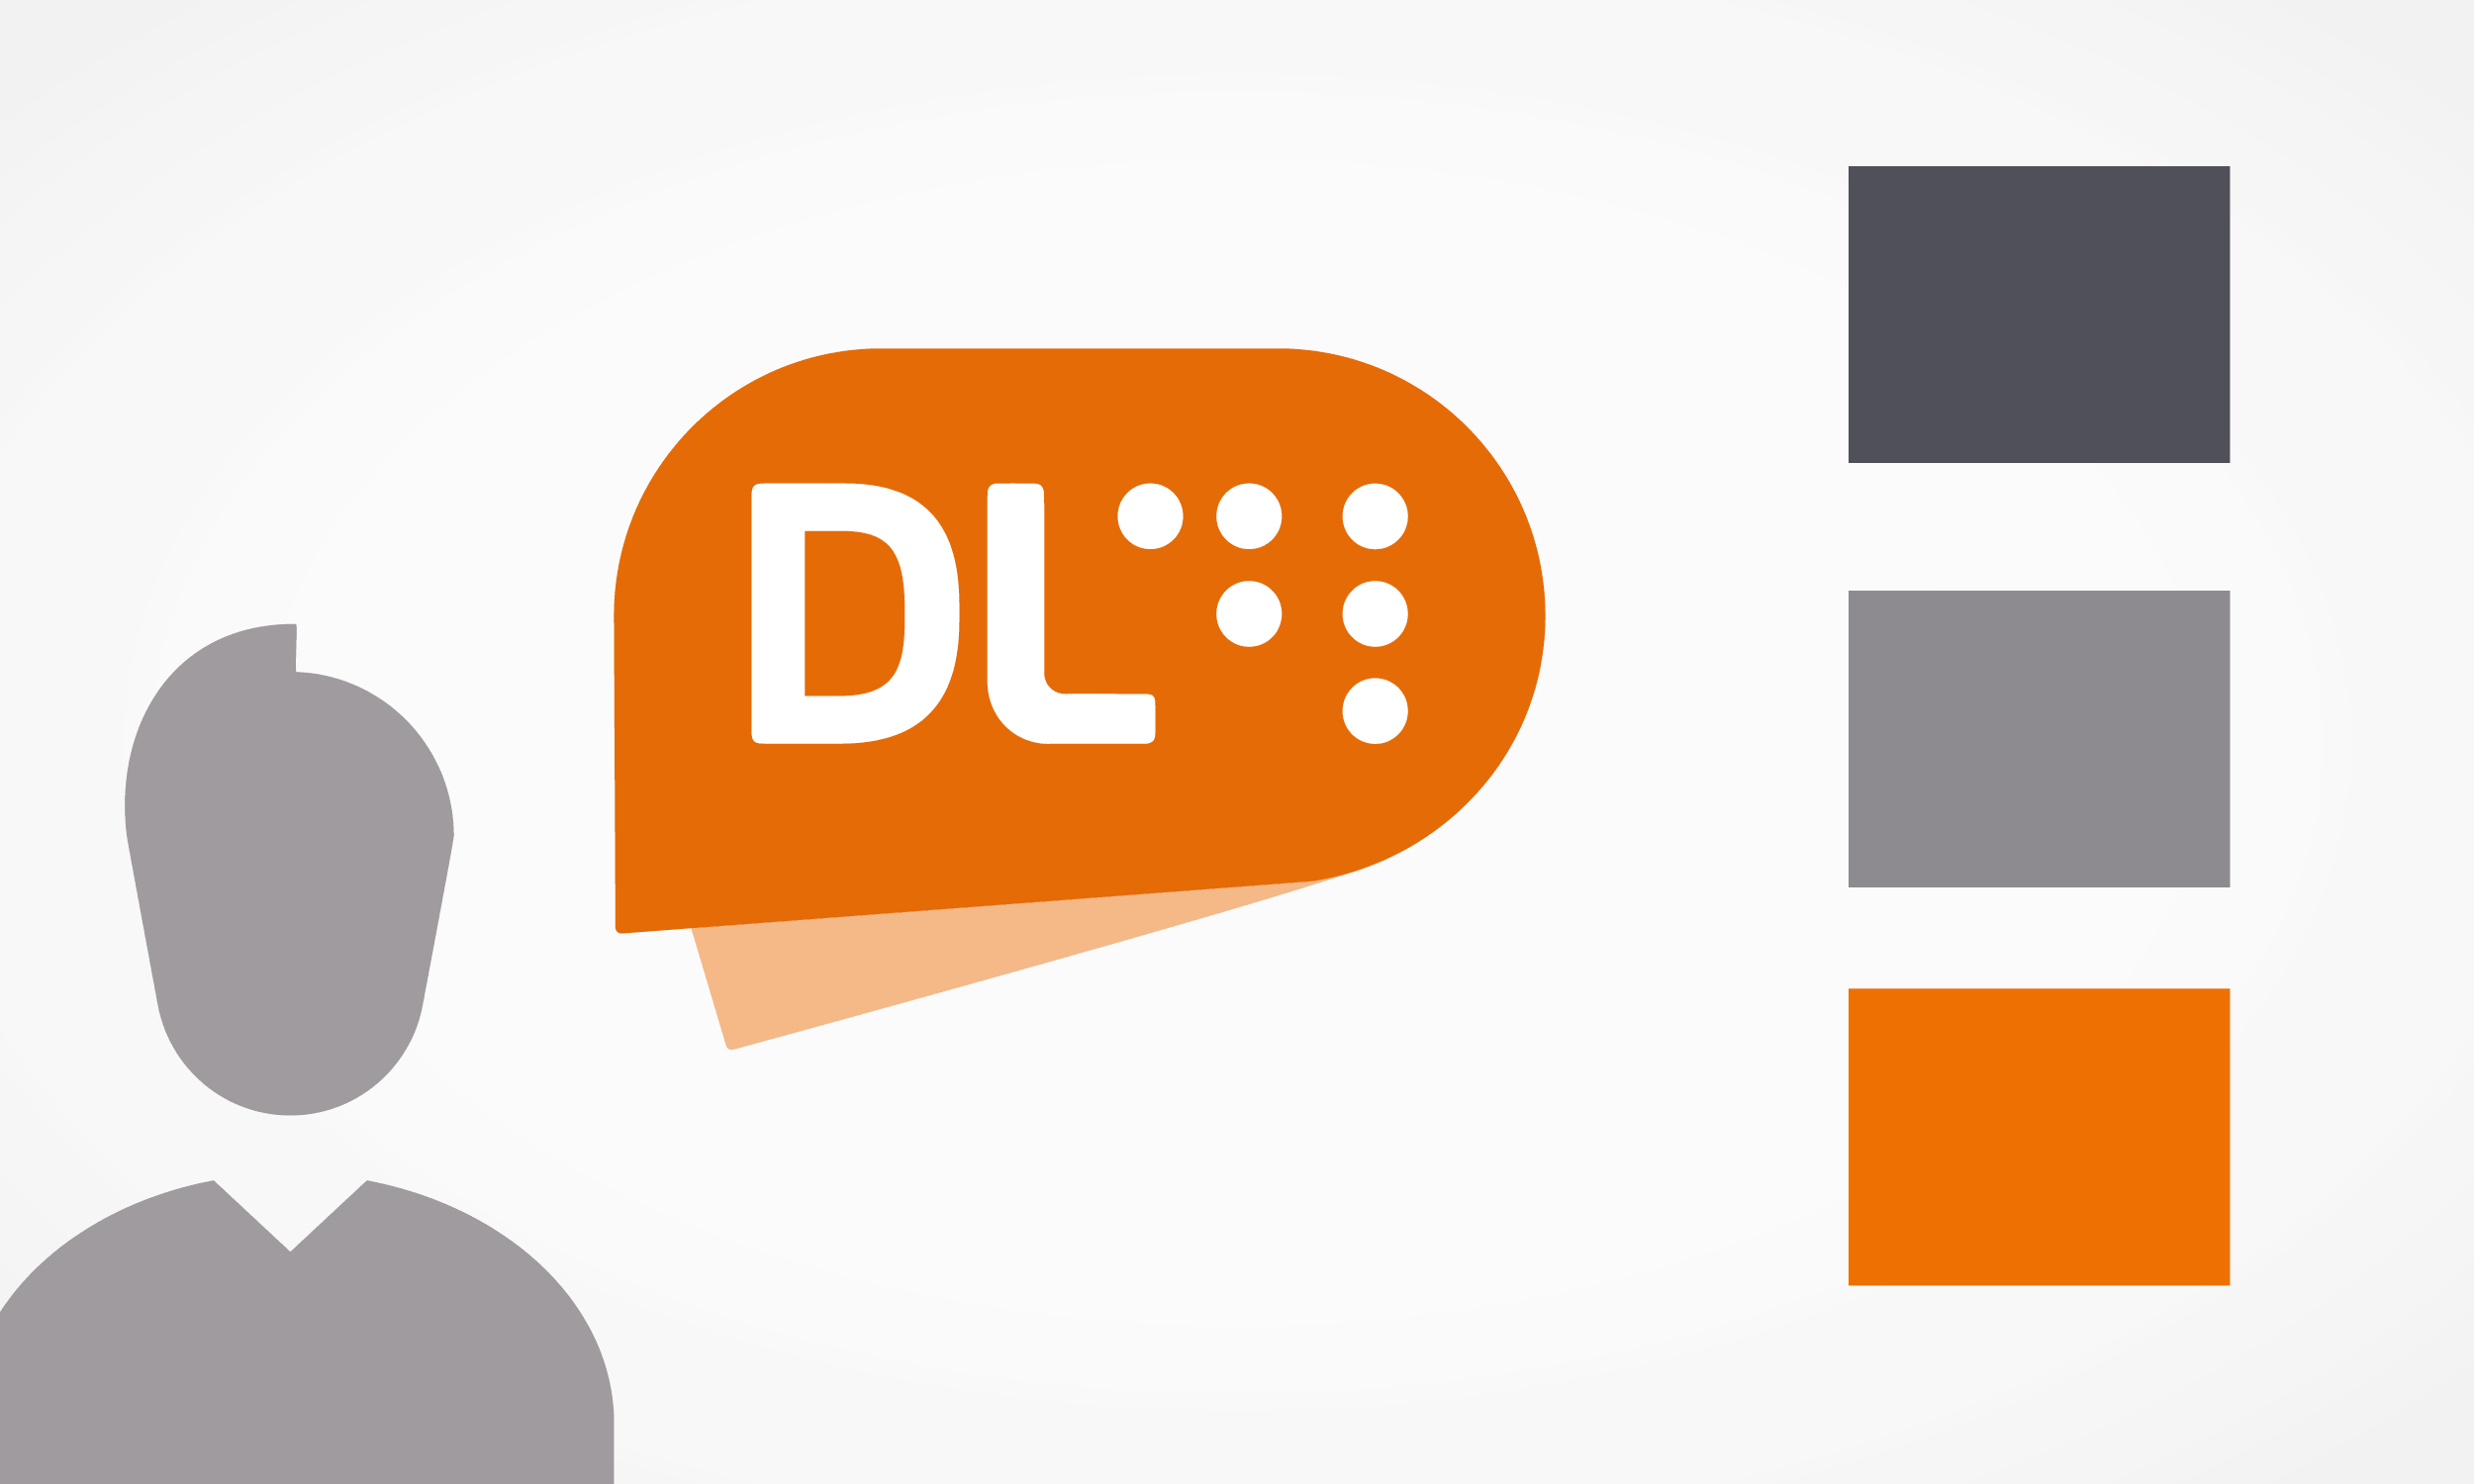 Schematic representation of the colour palette and the DL logo in combination with other icons